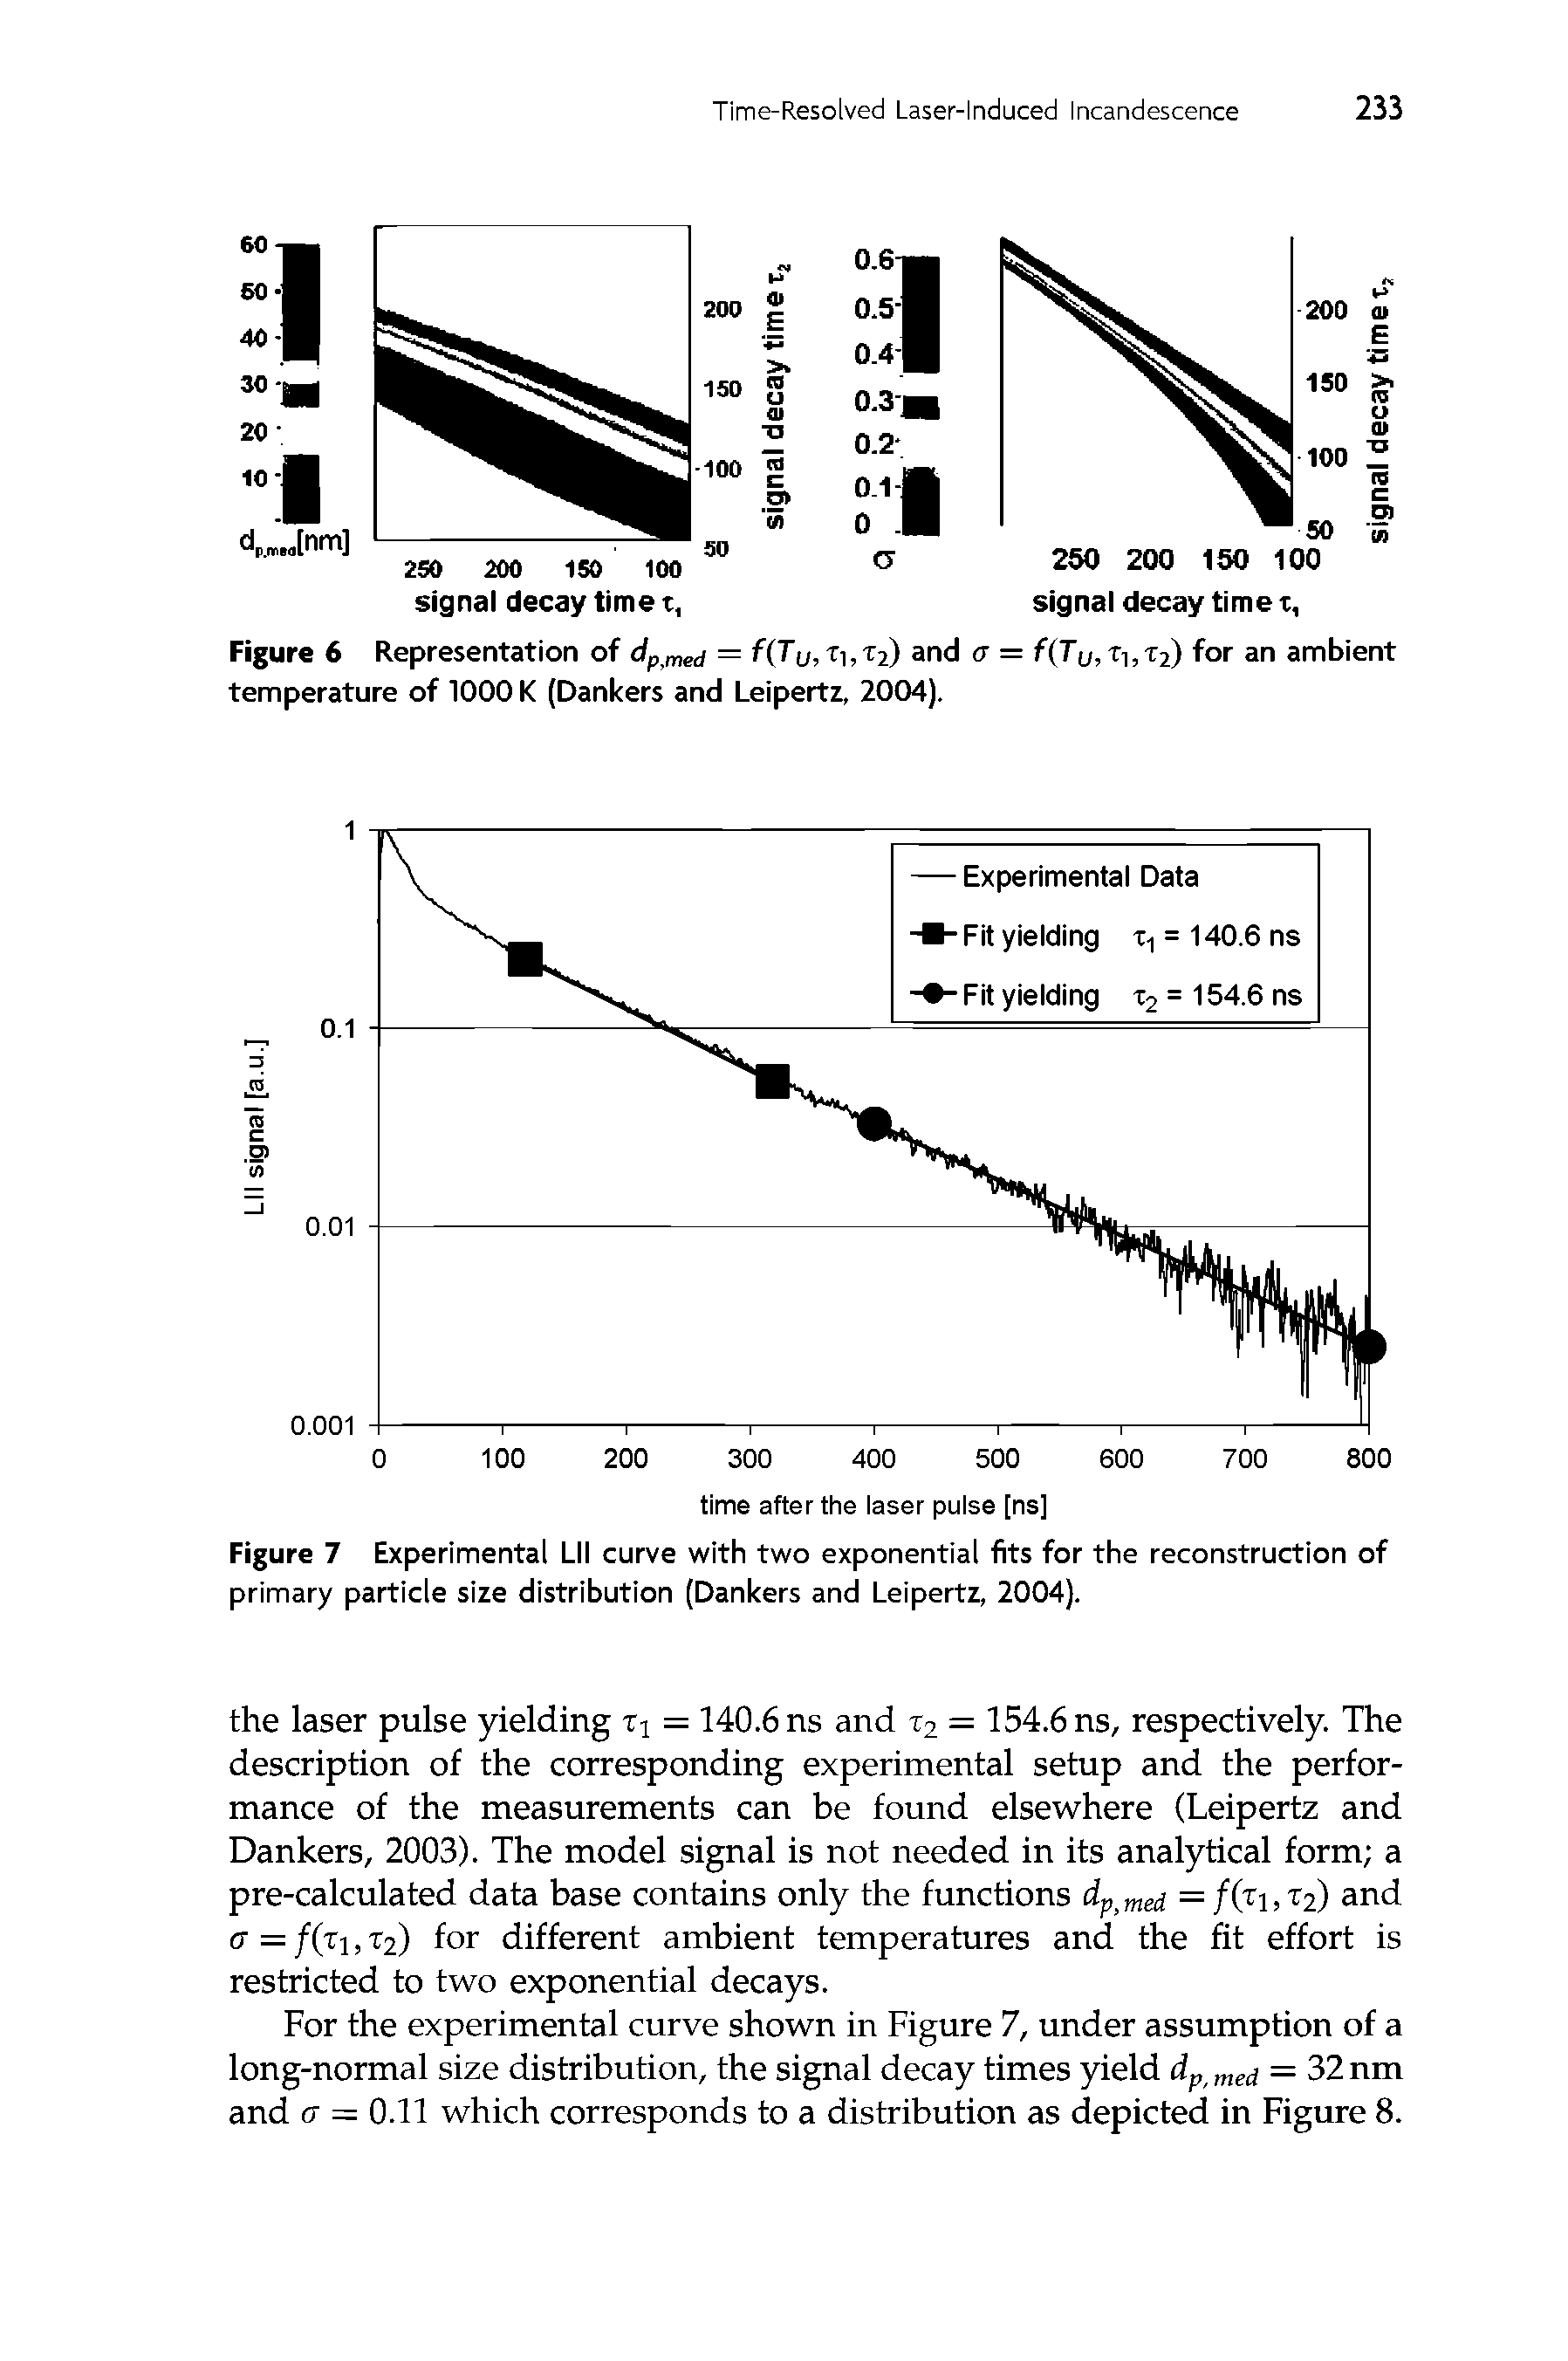 Figure 7 Experimental Lll curve with two exponential fits for the reconstruction of primary particle size distribution (Dankers and Leipertz, 2004).